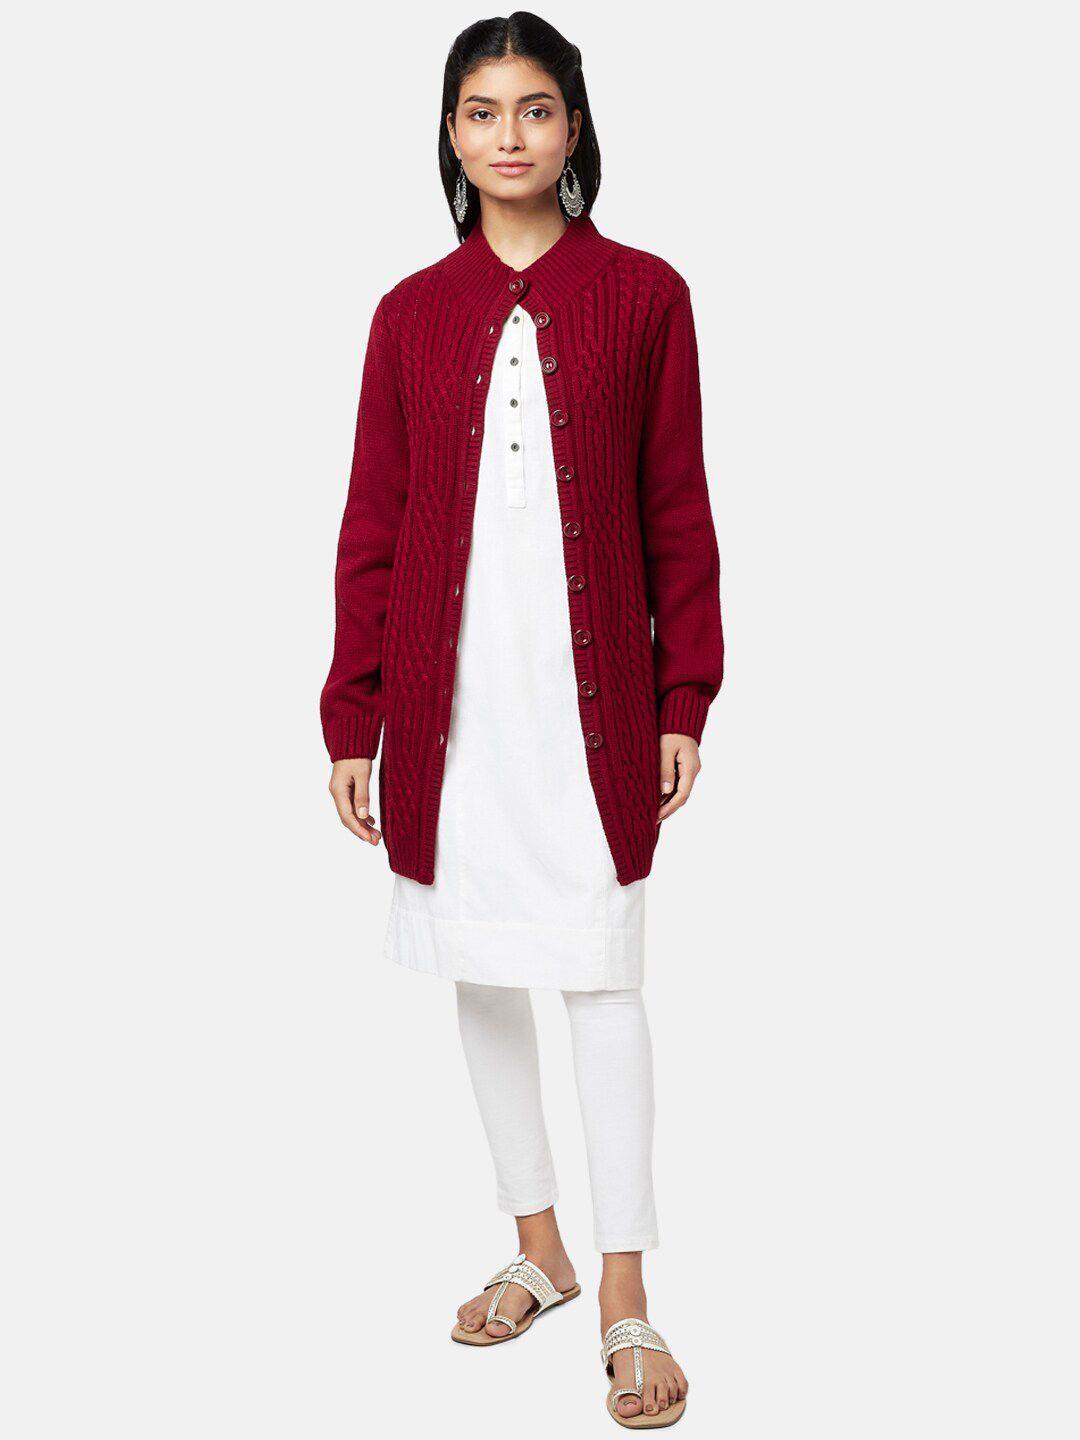 rangmanch by pantaloons women red cable knit cardigan